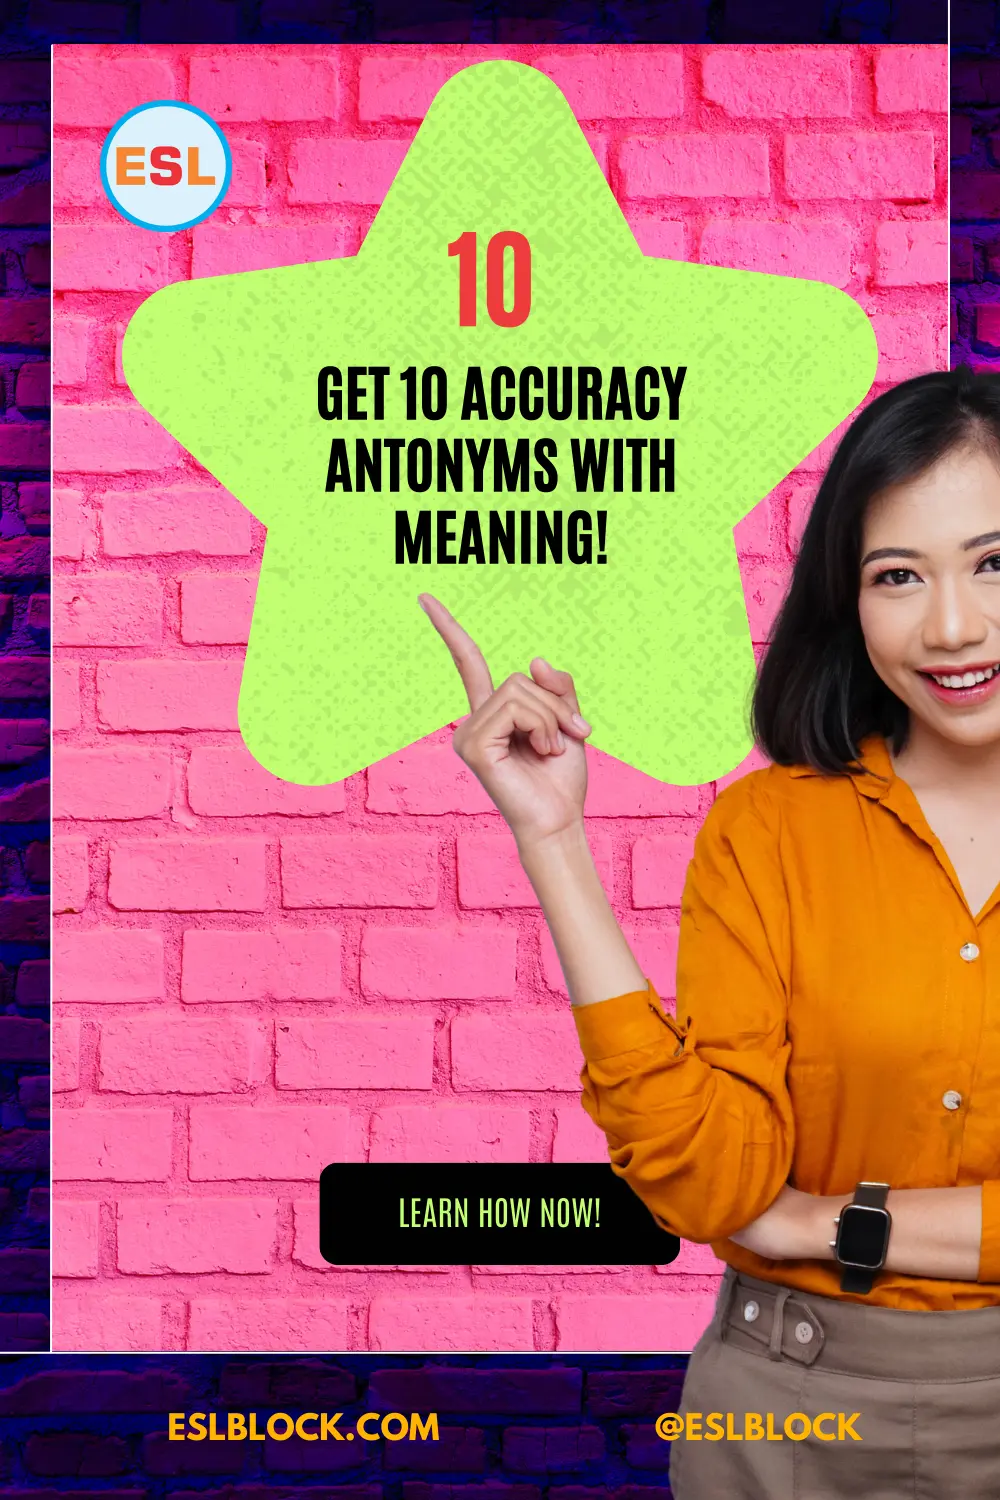 Get 10 Accuracy Antonyms with meaning!